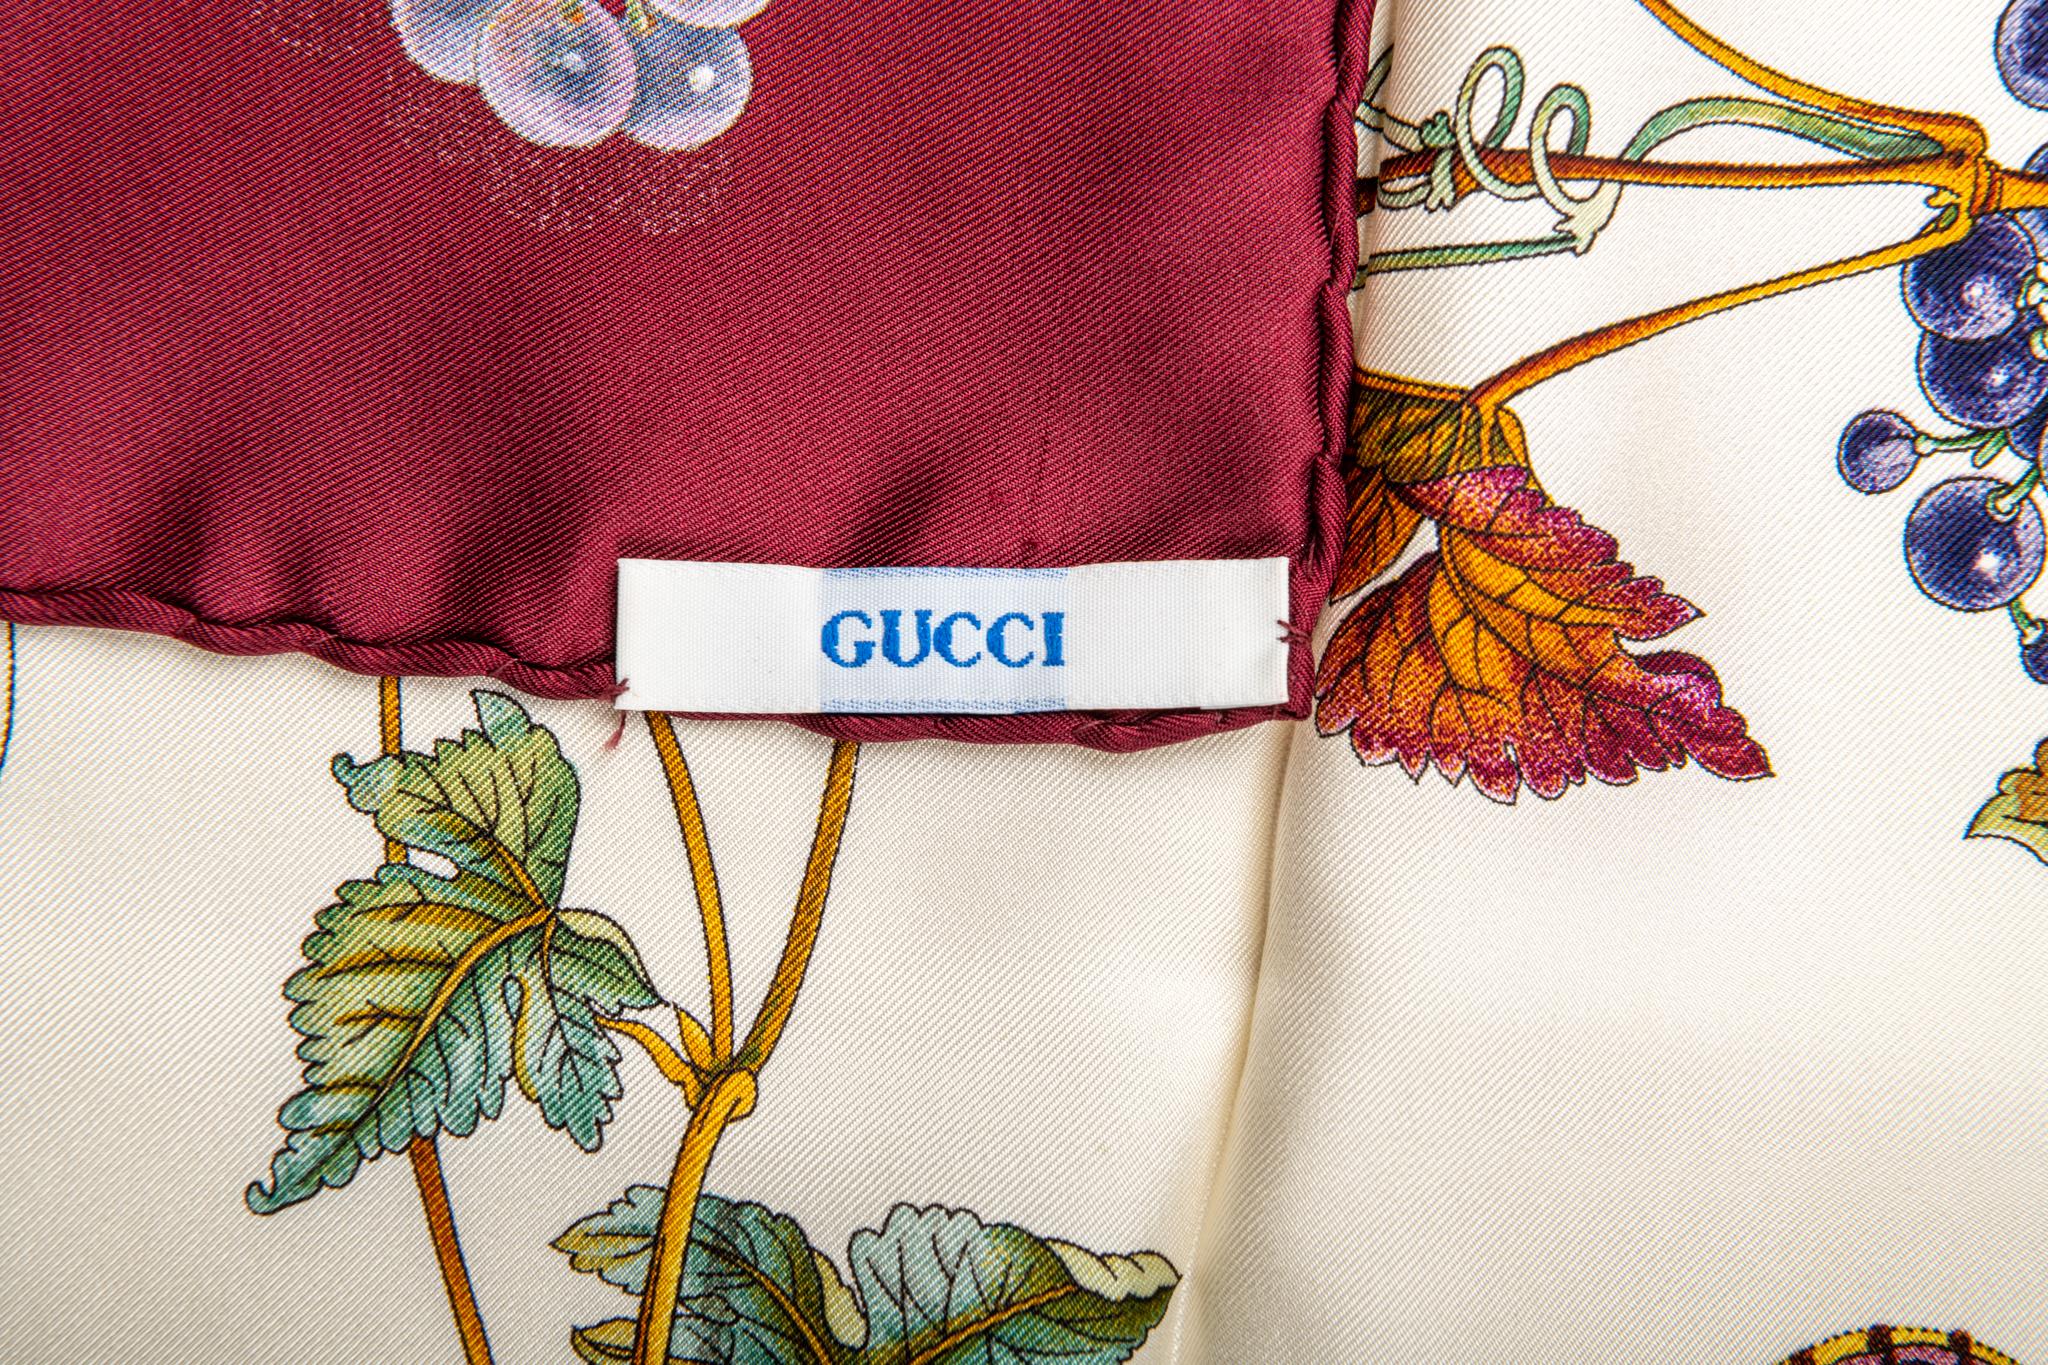 Gucci silk scarf with leaves and grapes design. Hand rolled edges.